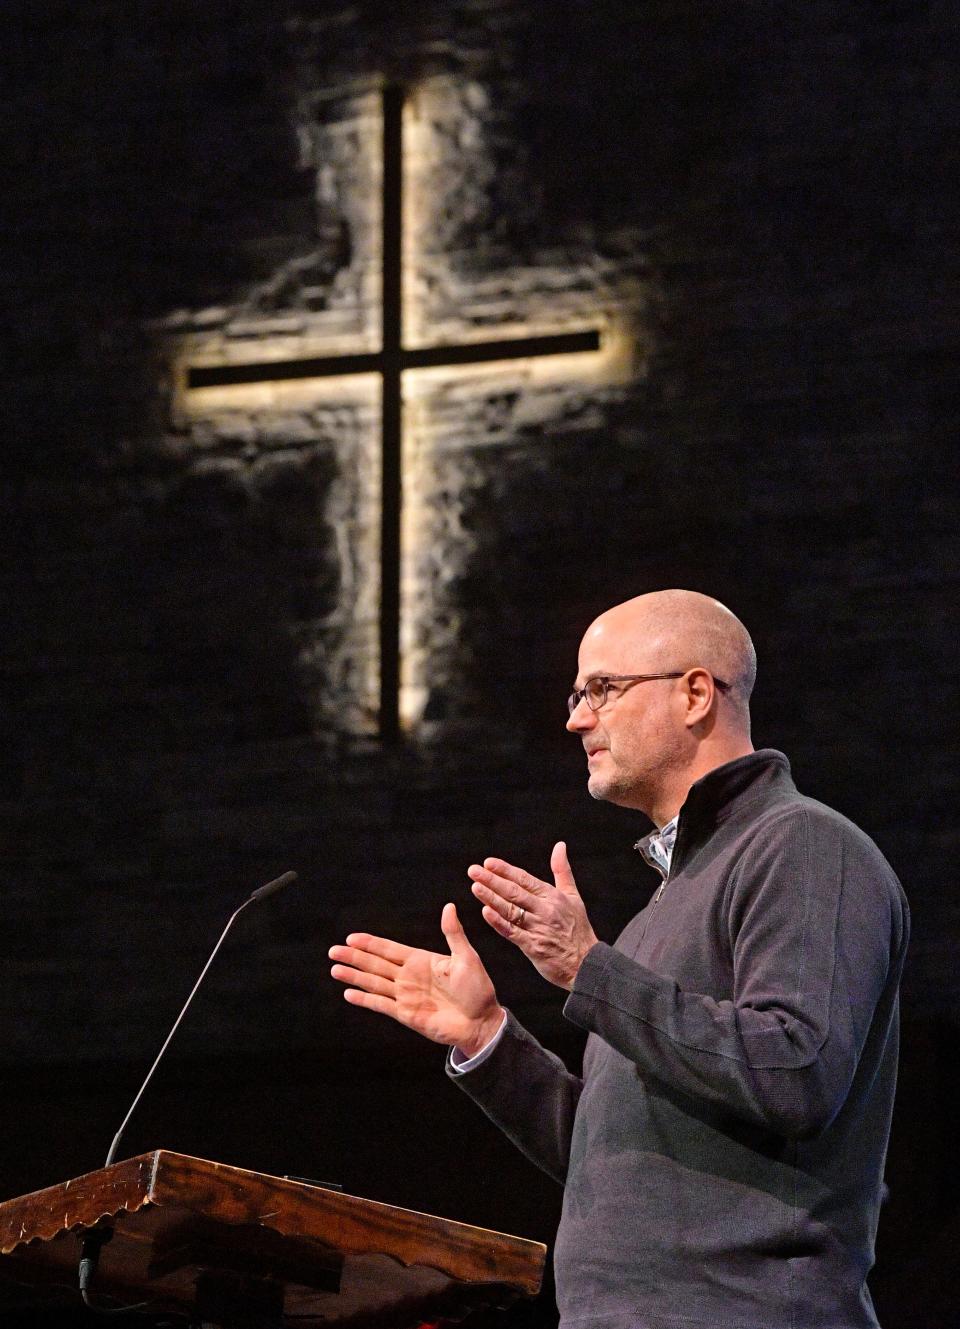 Rev. Scott Sauls, senior pastor of Christ Presbyterian Church in Nashville. The Nashville Presbytery's handling of an inquiry into Sauls for workplace issues at Christ Presbyterian has raised larger questions about the presbytery's system of accountability.